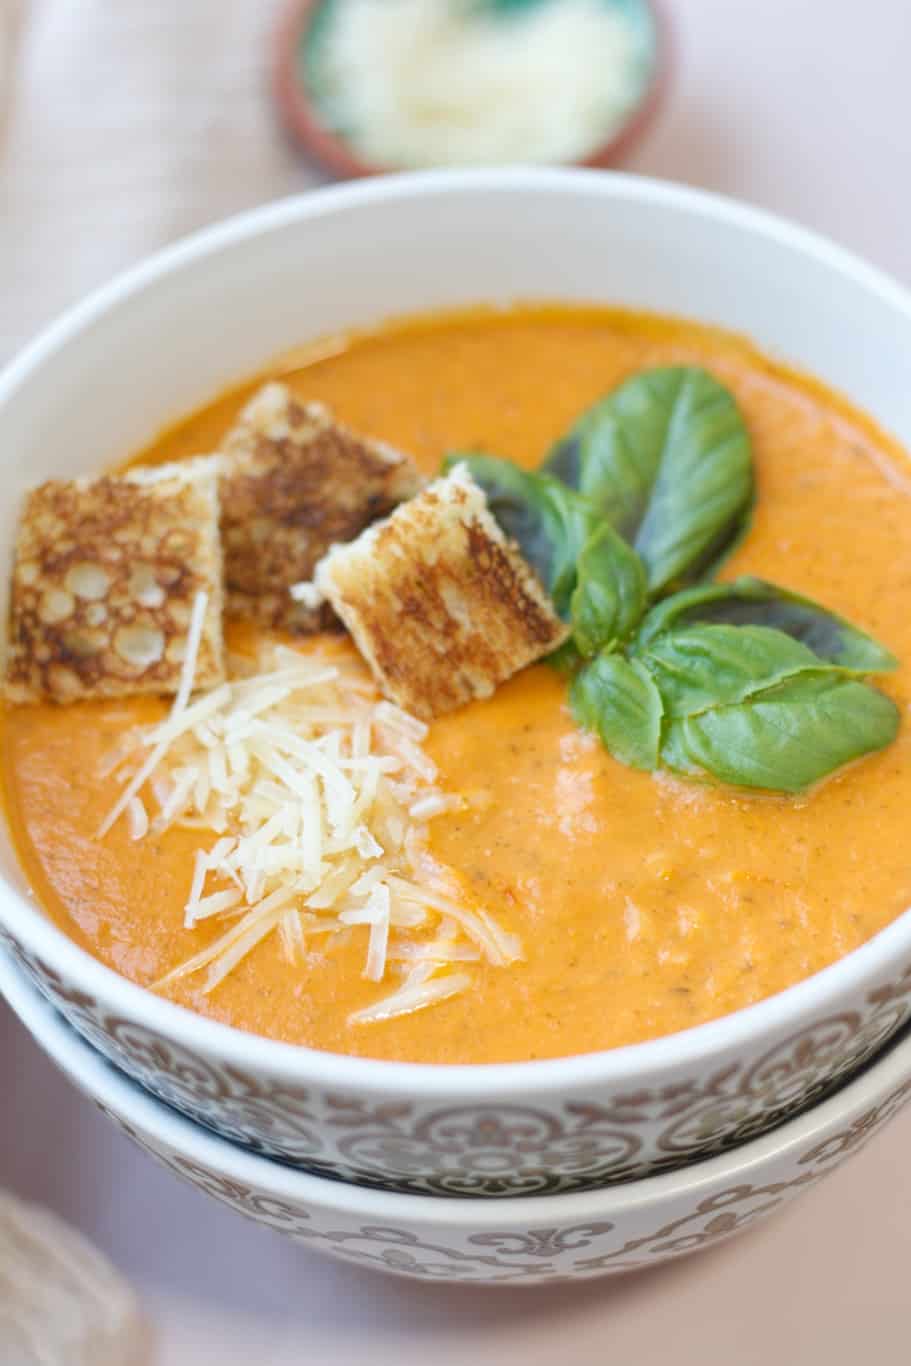 This instant pot tomato basil soup is served with fresh basil leaves, grated parmesan cheese, and crunch croutons on the top.